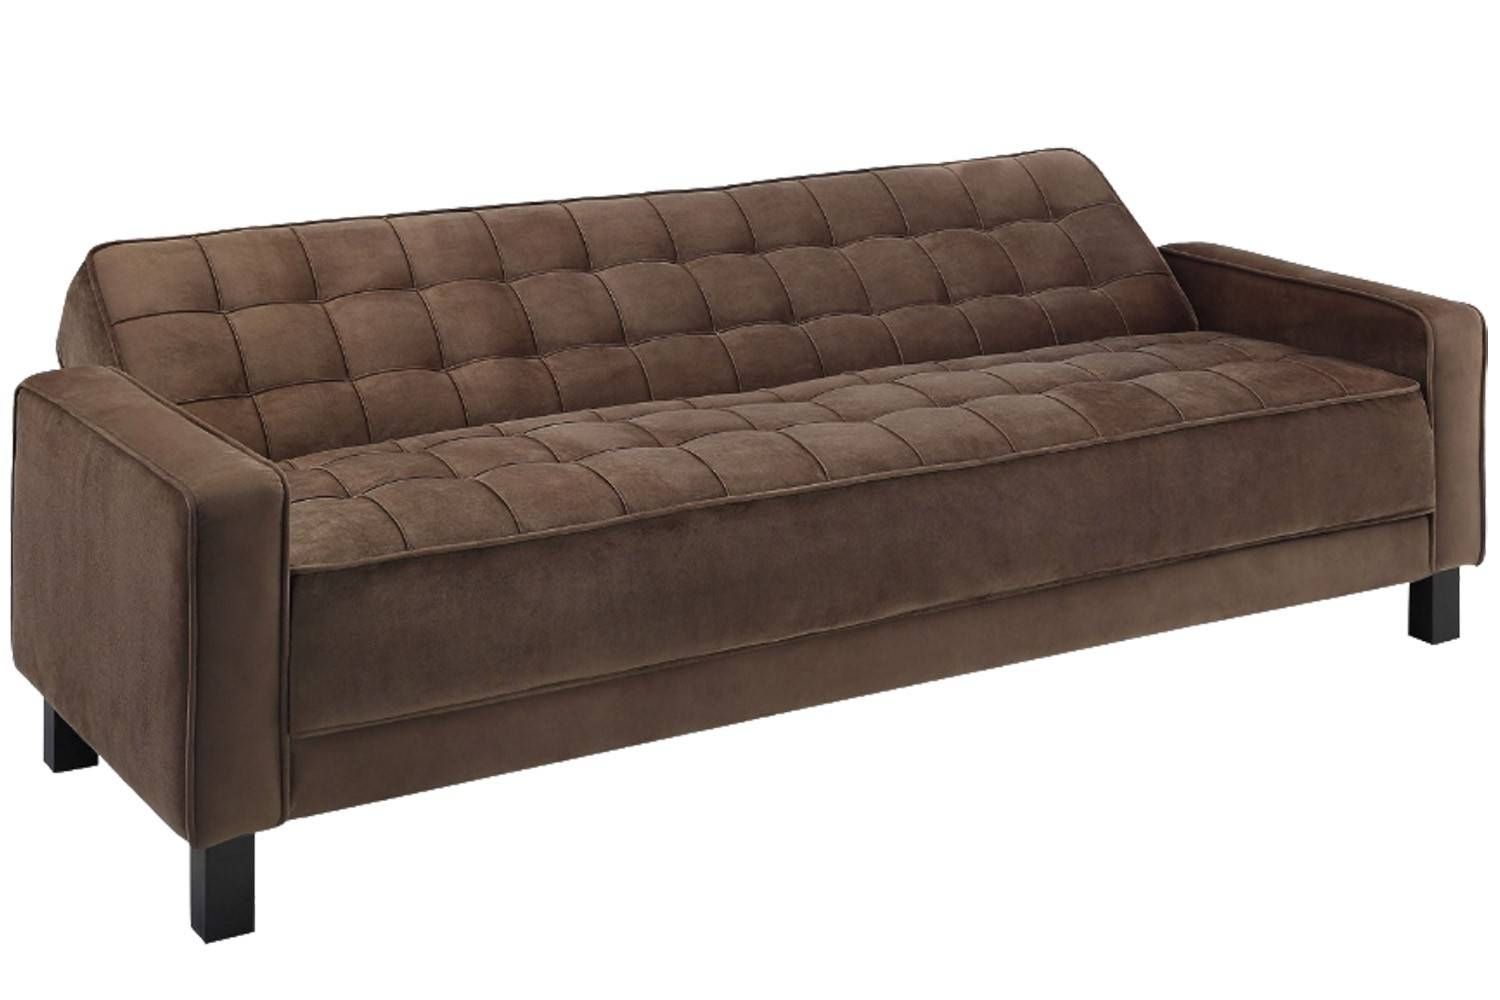 Convertible Mckinley Brown Sofa Bed | Mckinley Brown Euro Lounger Pertaining To Sofa Lounger Beds (View 22 of 30)